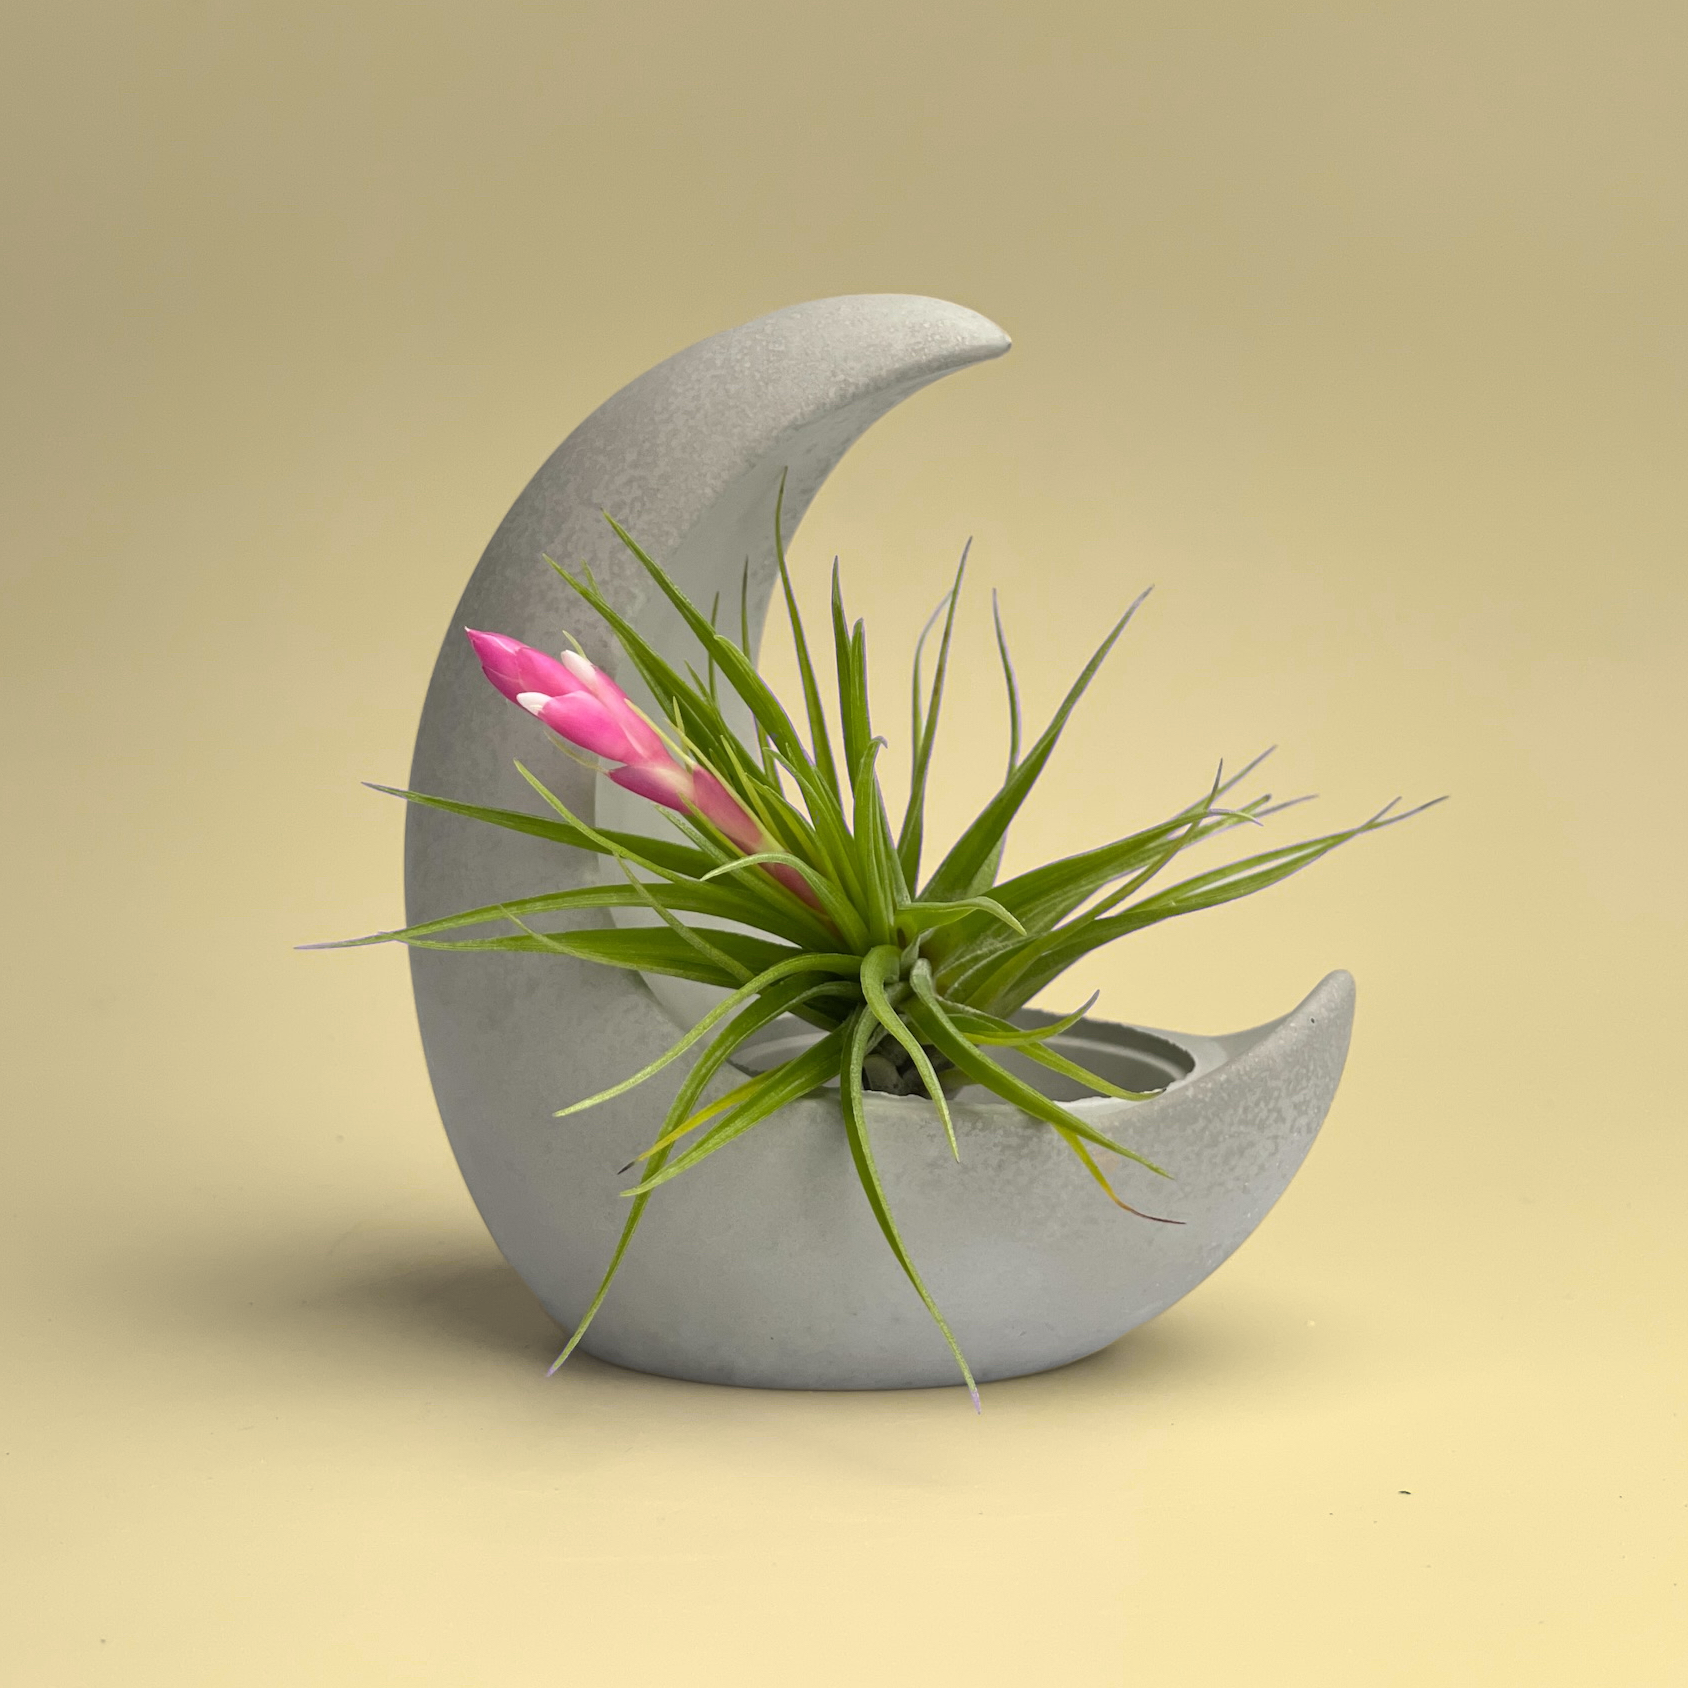 YOUNG MOON AIR PLANT HOLDER Tillandsia airplant live plant decor – HOME